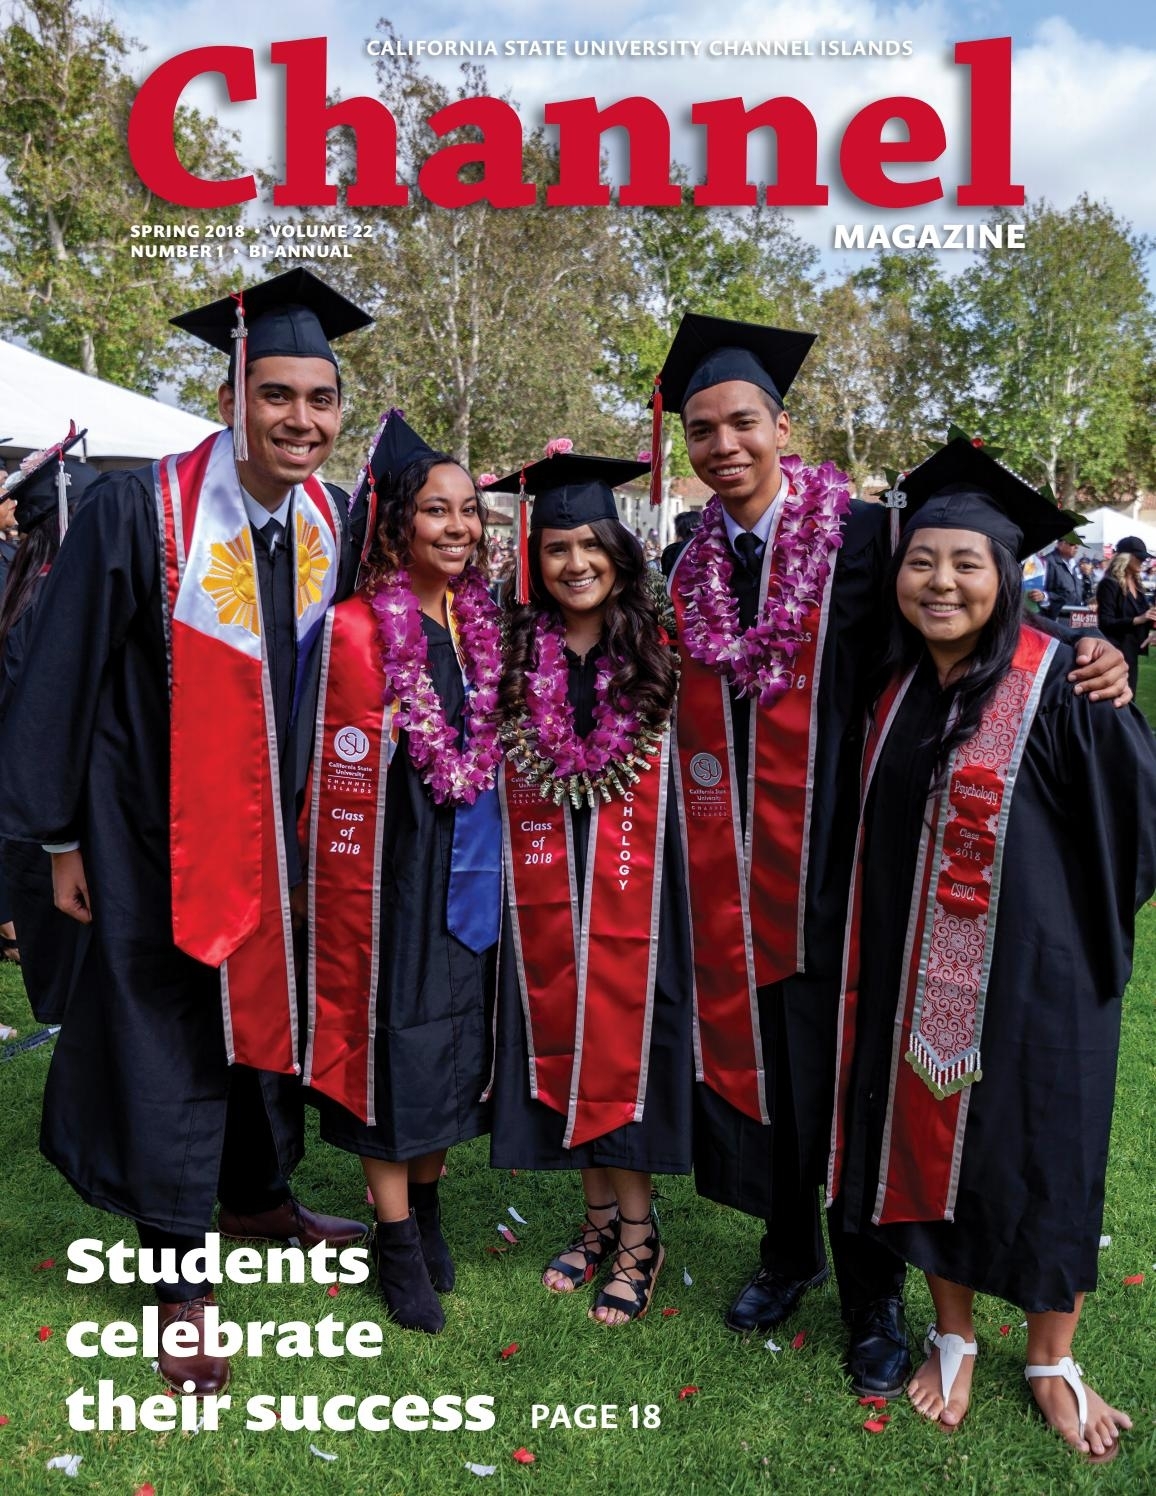 Channel Spring 2018Csu Channel Islands - Issuu with regard to Yearly Cost For Attending At Csuci